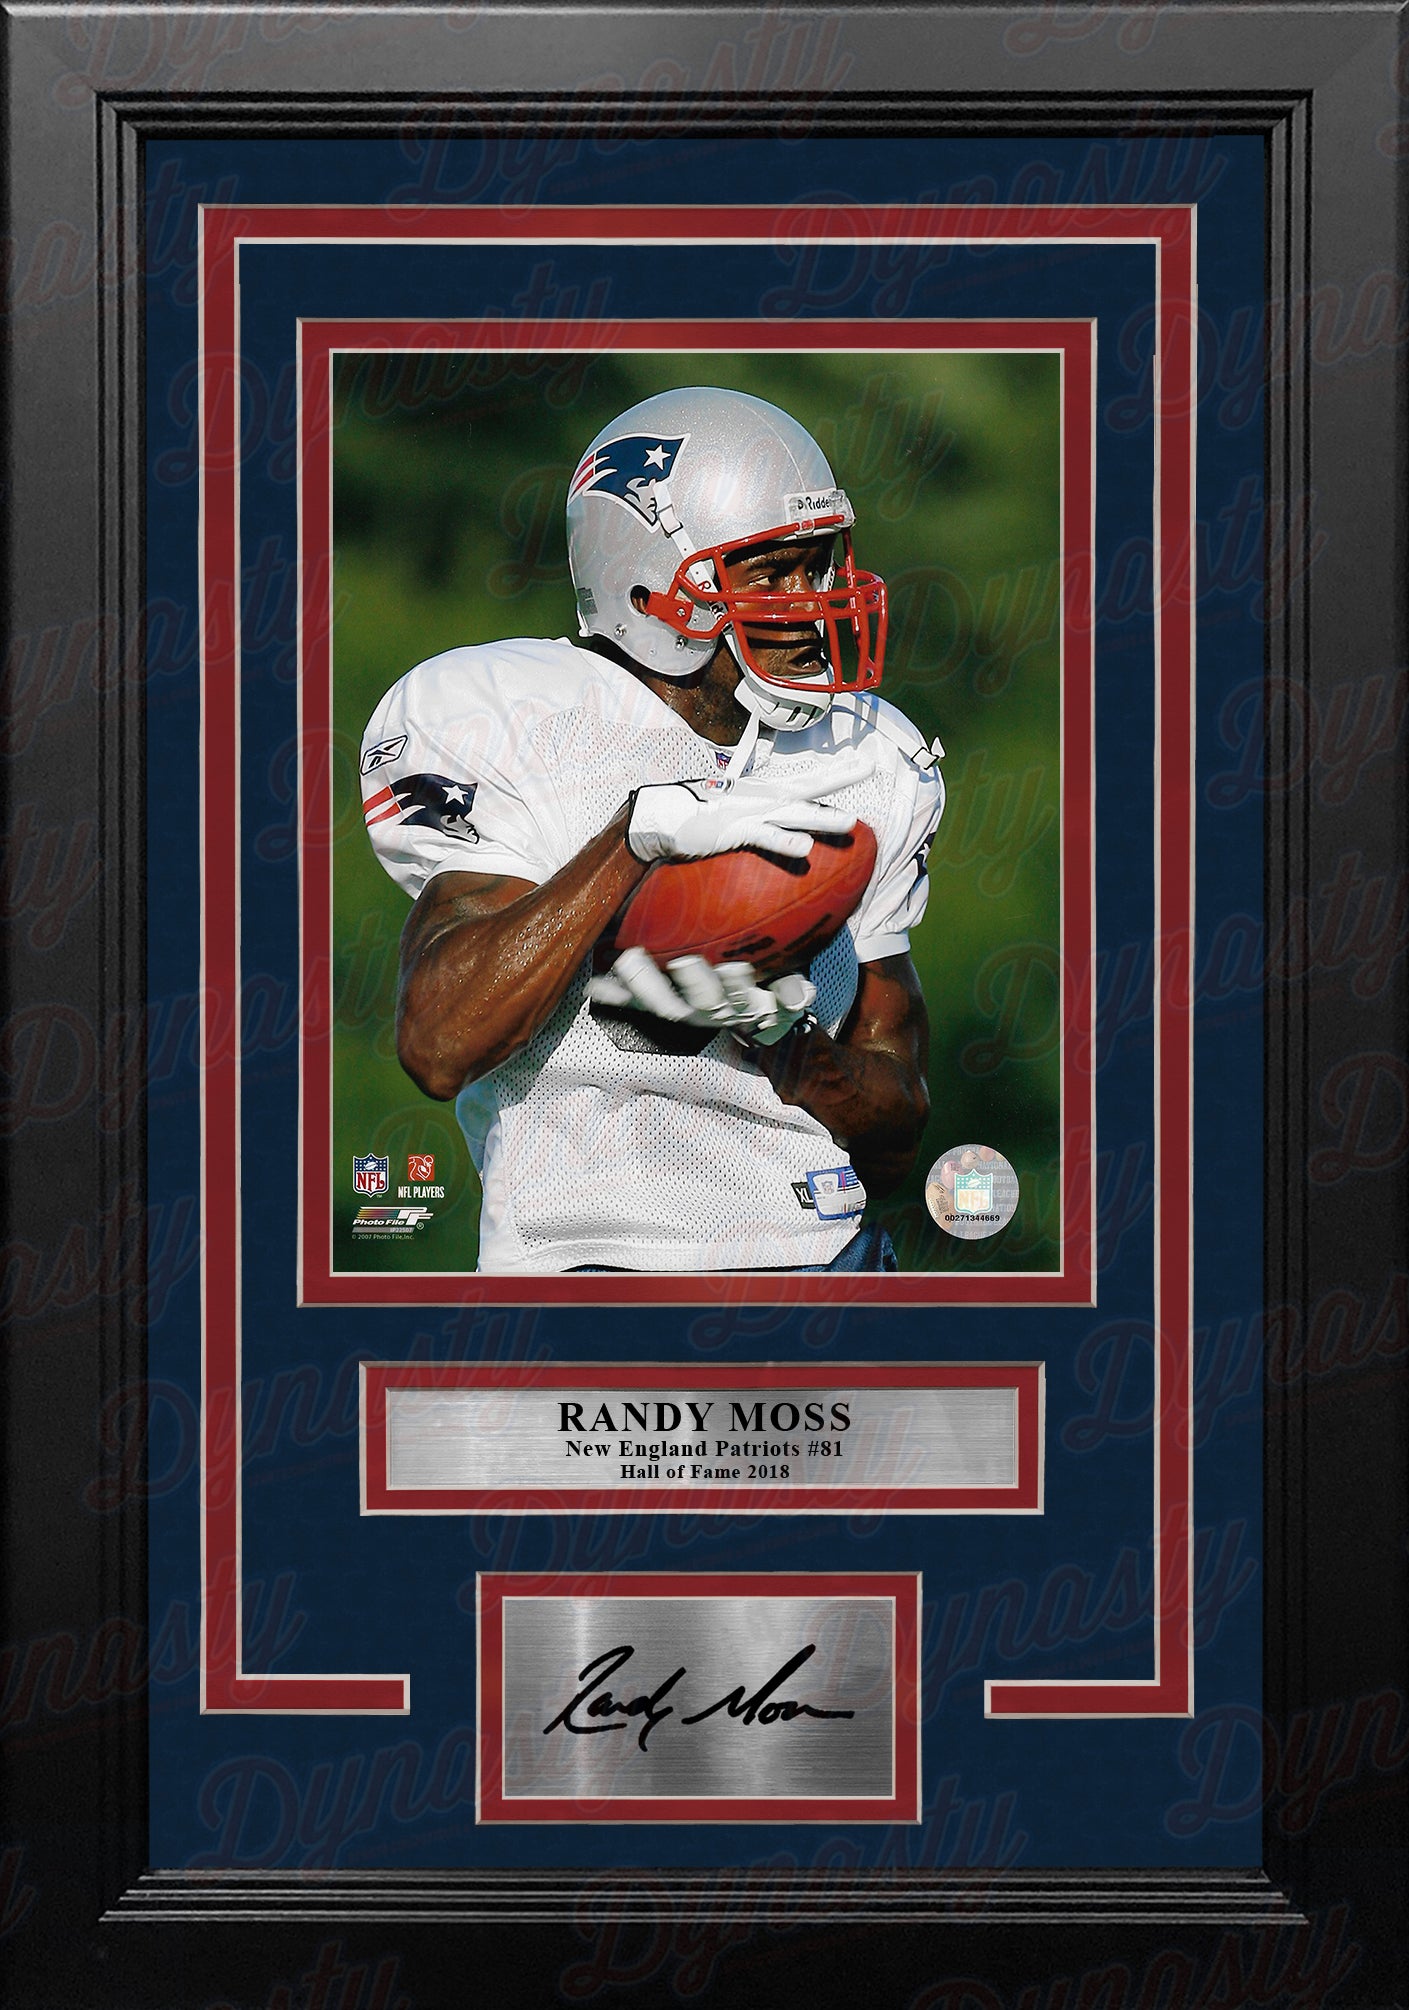 Randy Moss in Action New England Patriots 8' x 10' Framed Football Photo  with Engraved Autograph